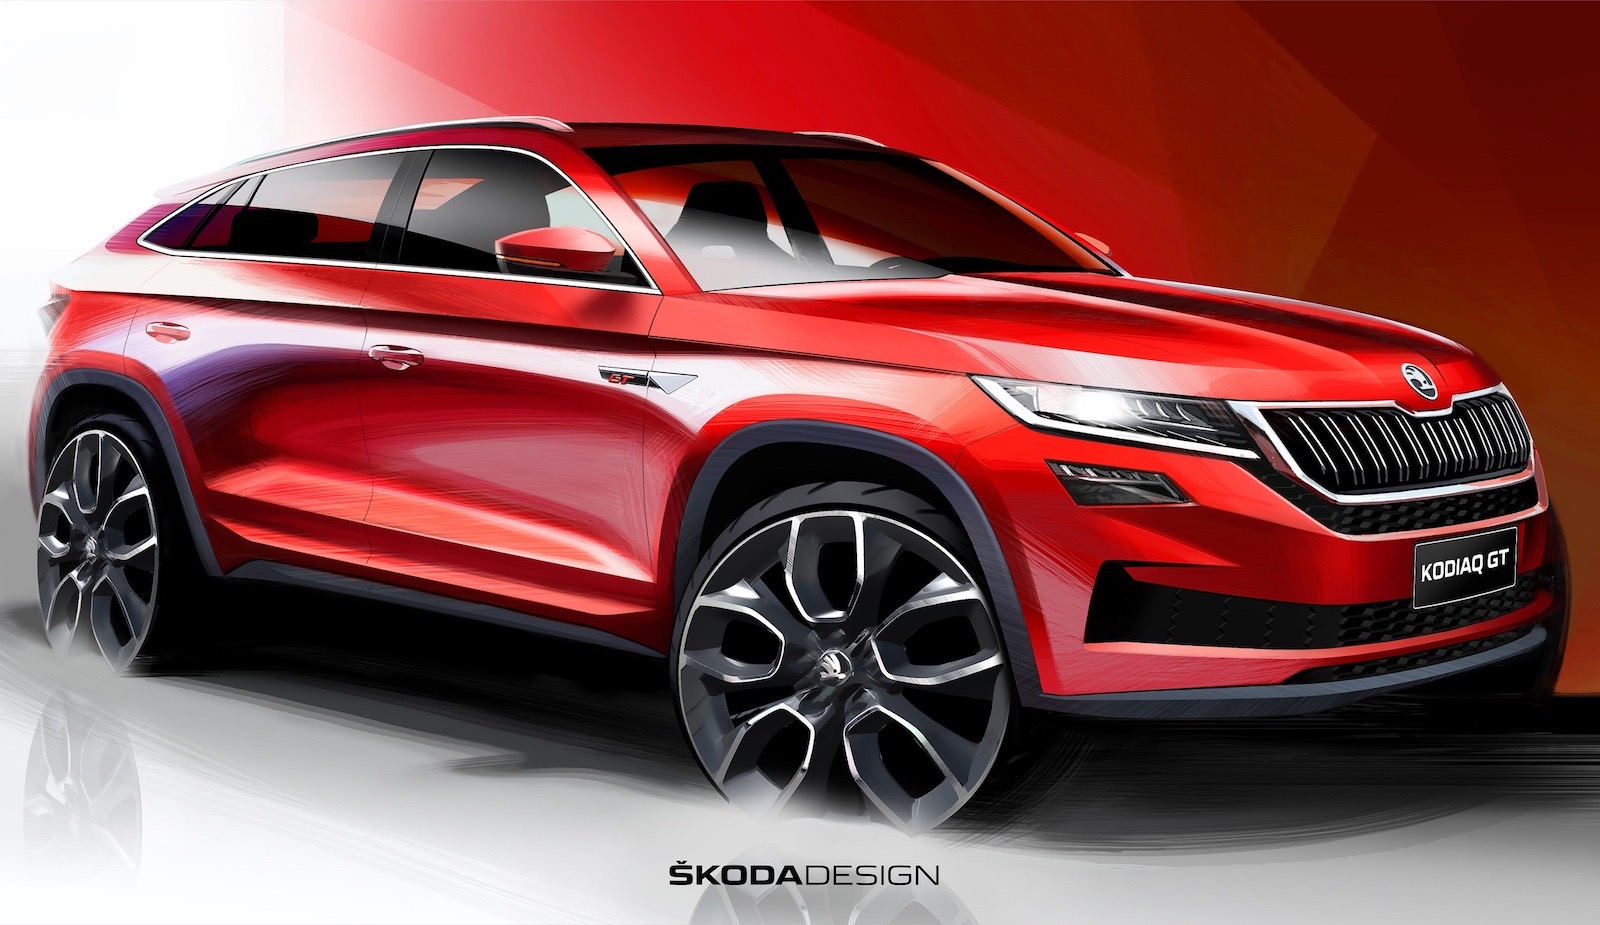 Skoda Kodiaq GT coupe SUV previewed, for China only